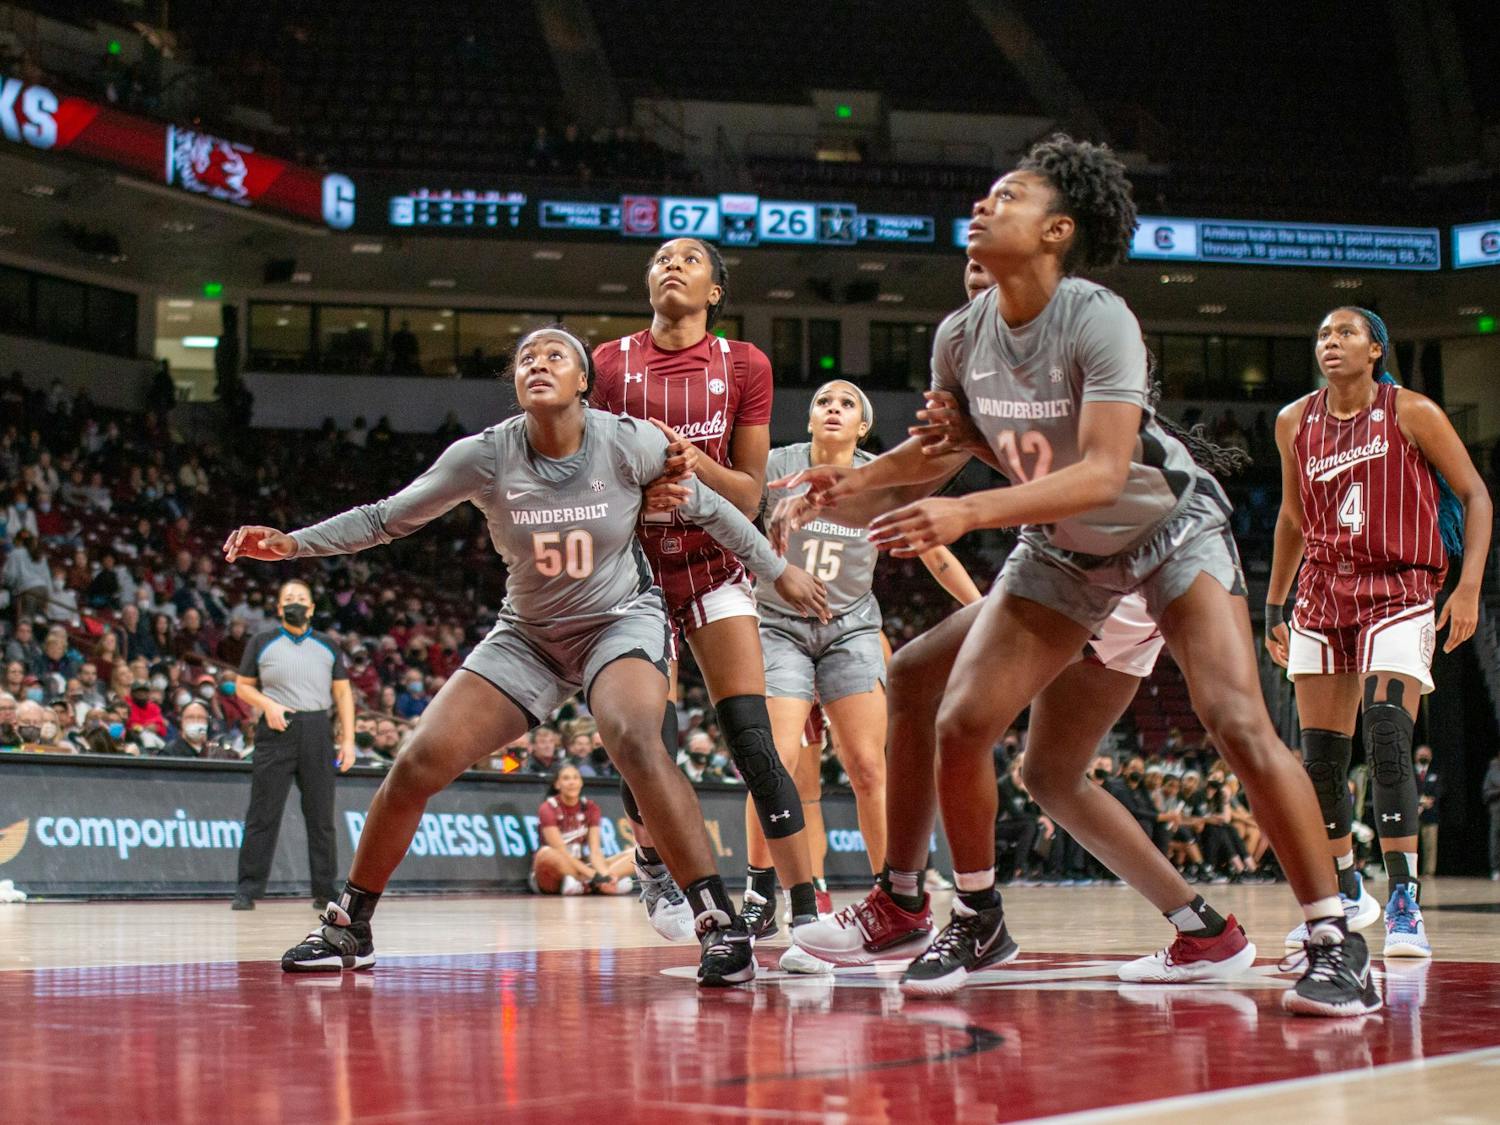 Freshman Guard Bree Hall attempts to go for an offensive rebound in case the free throw misses during a game on January 24, 2022 at Colonial Life Arena. The Gamecocks dominated both halves, defeating Vanderbilt 85-30. 